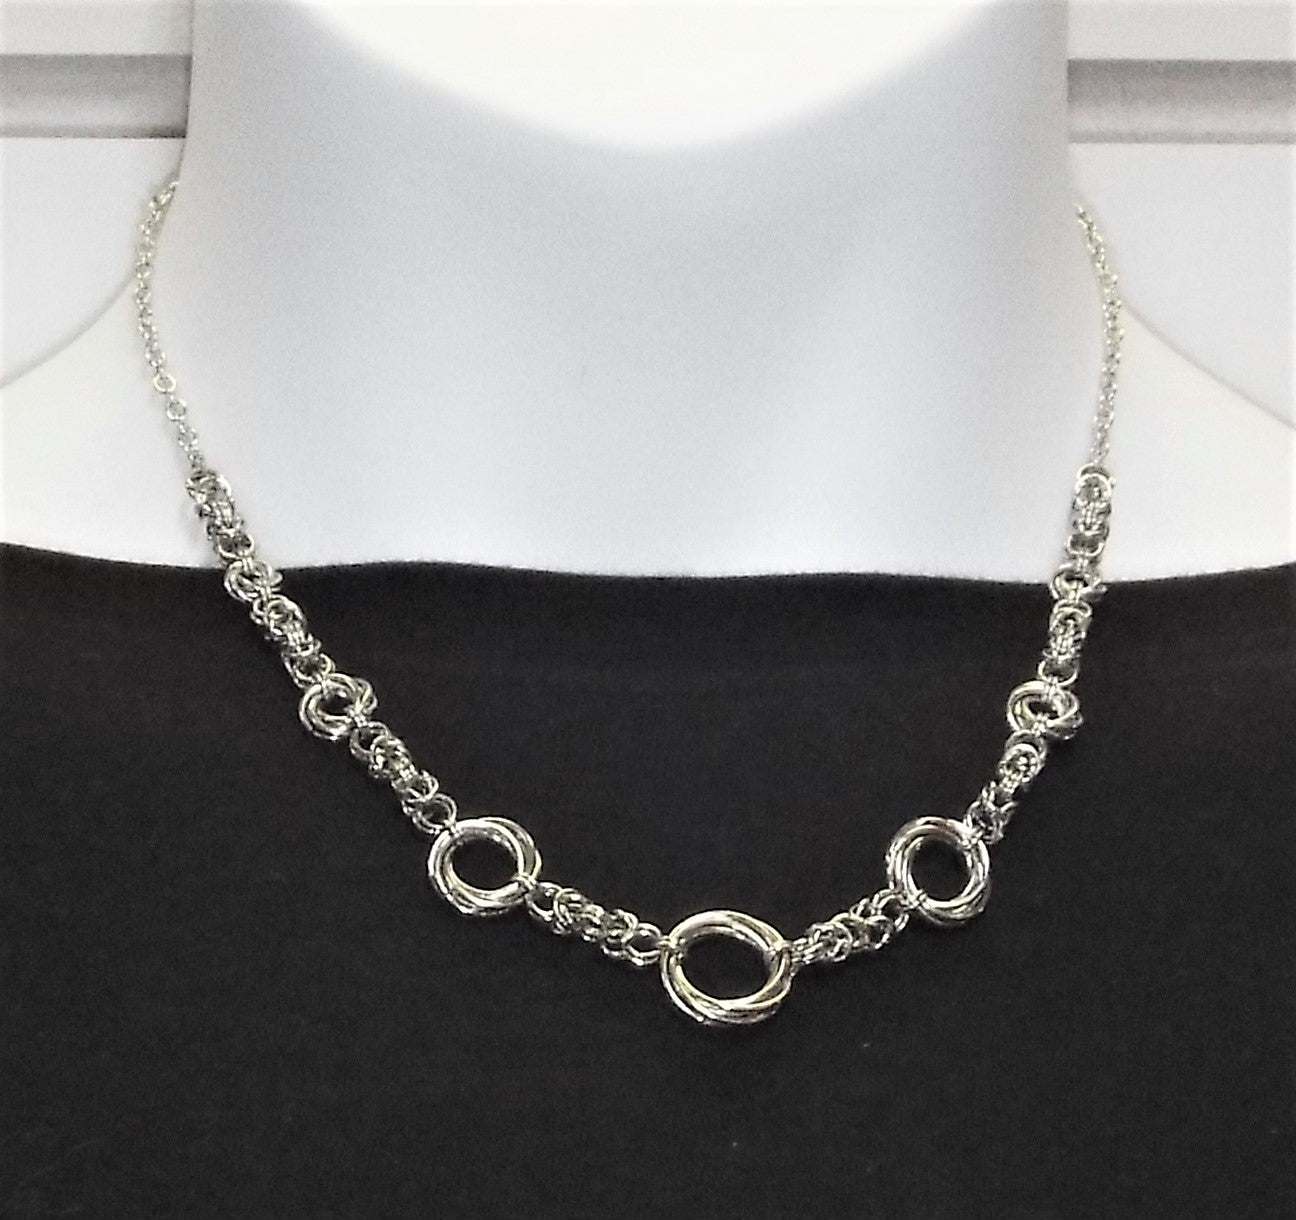 Necklace, Chainmaille - NEW LOWER PRICE!